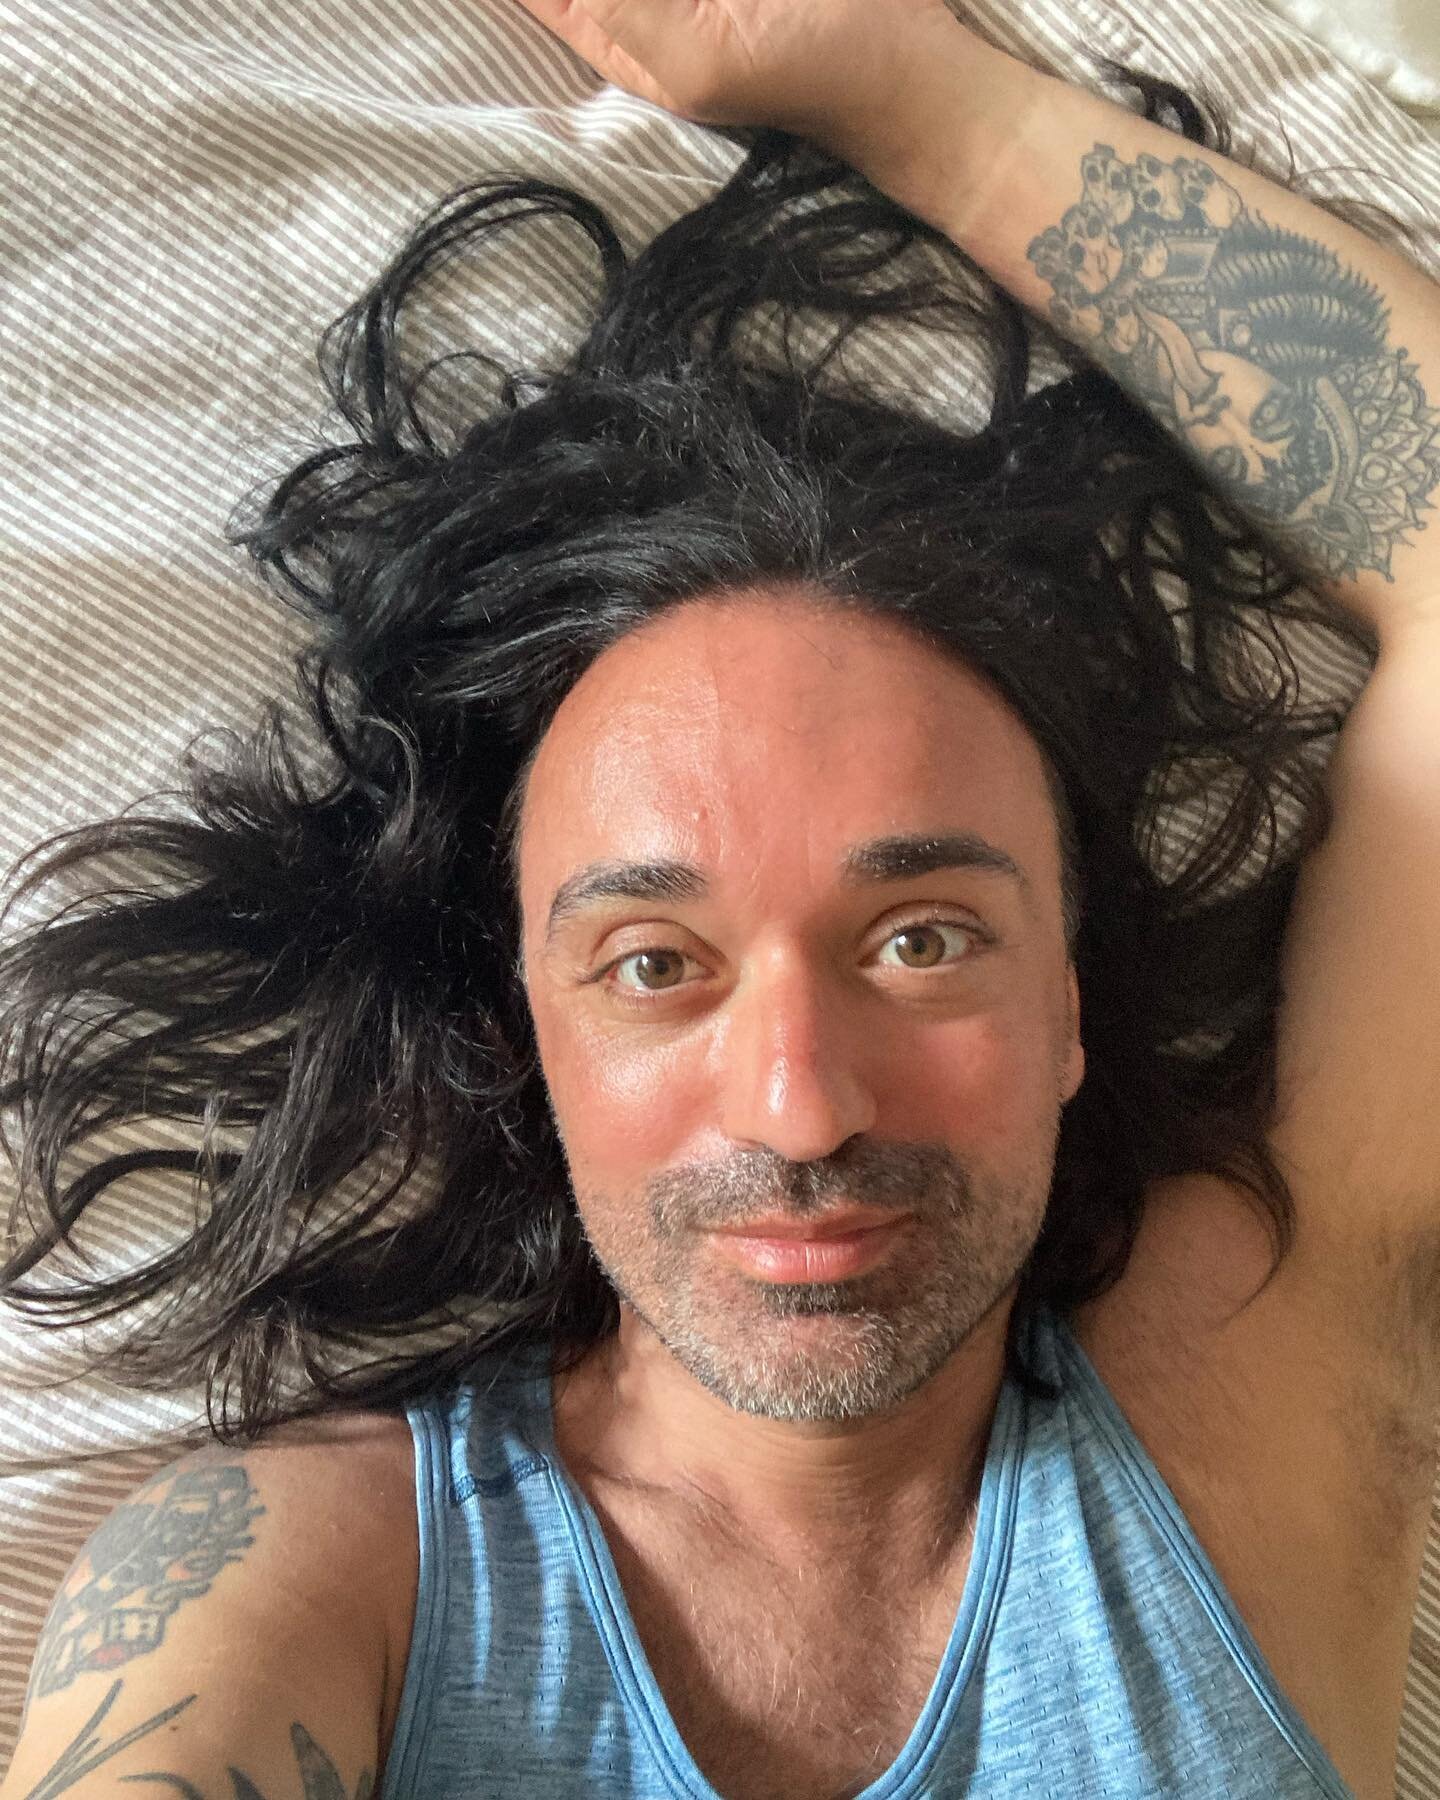 totally blissed out in Portugal ☀️

Sun
Food
Beaches
Nature
Sparkling Water
Self love
Amazing friends 
And allowing myself to press recharge
.
.
.
.
.
.
#portugal #thepowerofnow #selflove #beyourself #youcanhealyourlife #guyswithlonghair